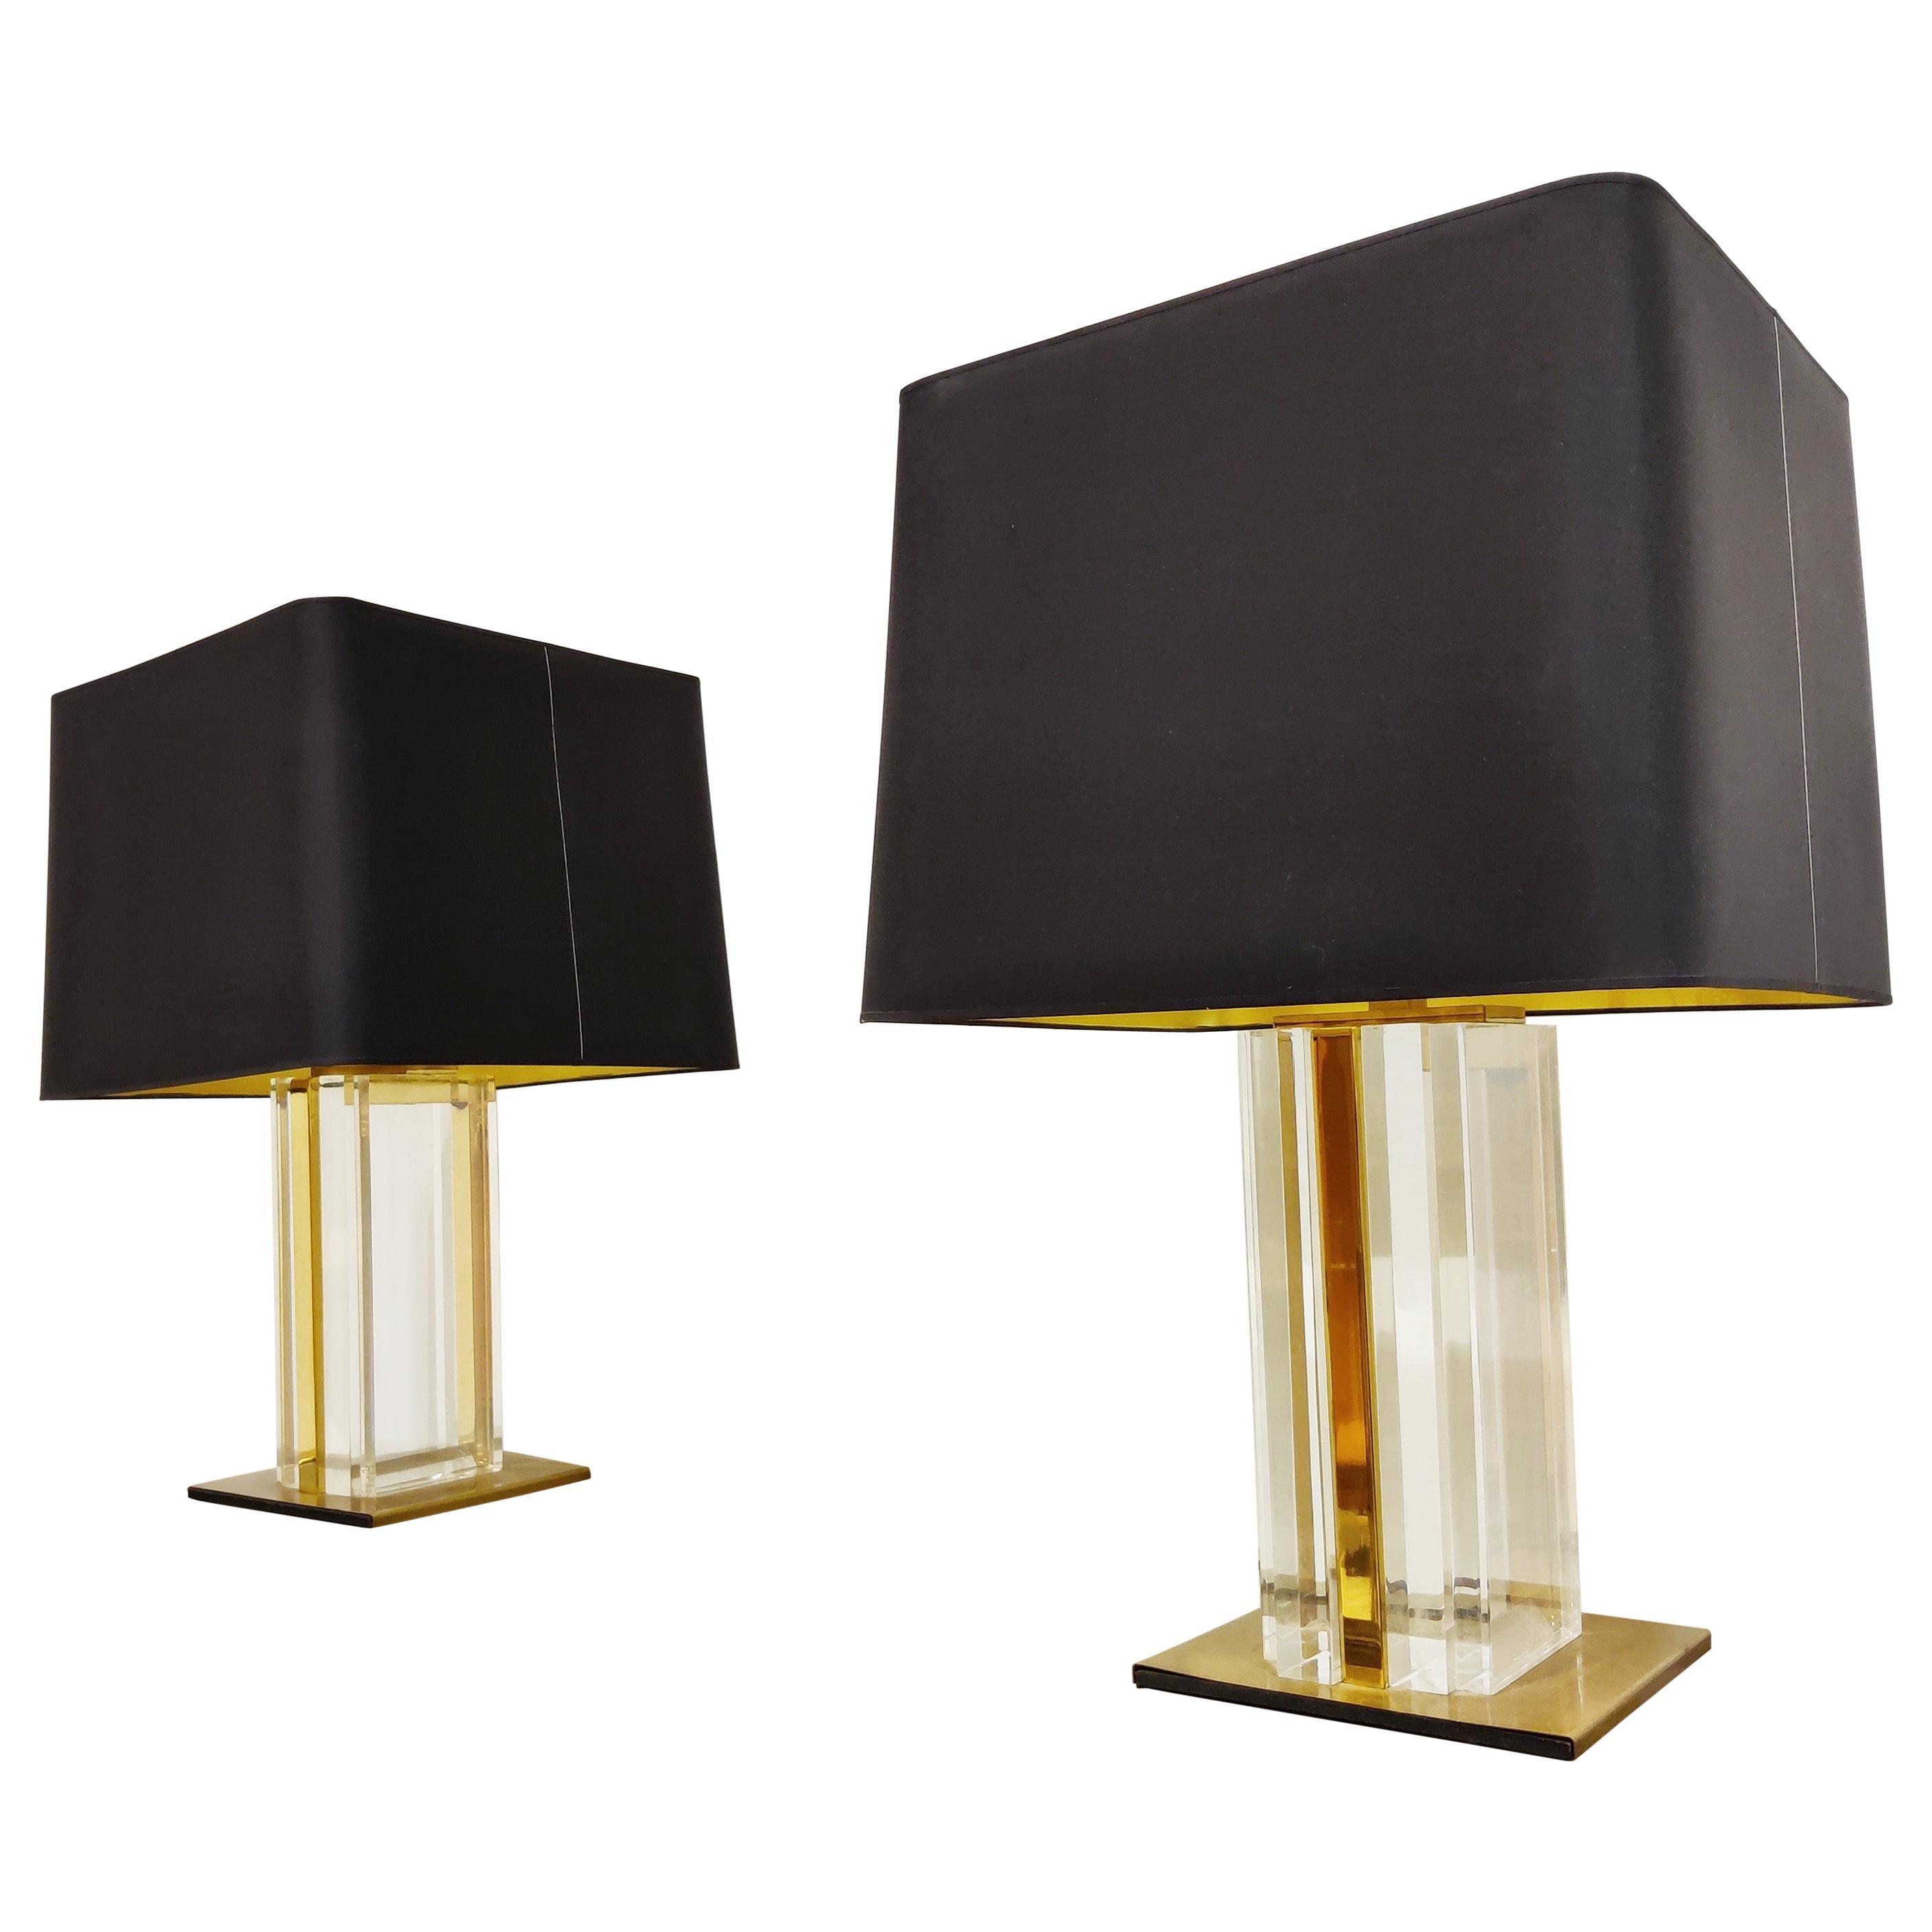 Pair of Vintage Brass and Lucite Table Lamps, 1970s